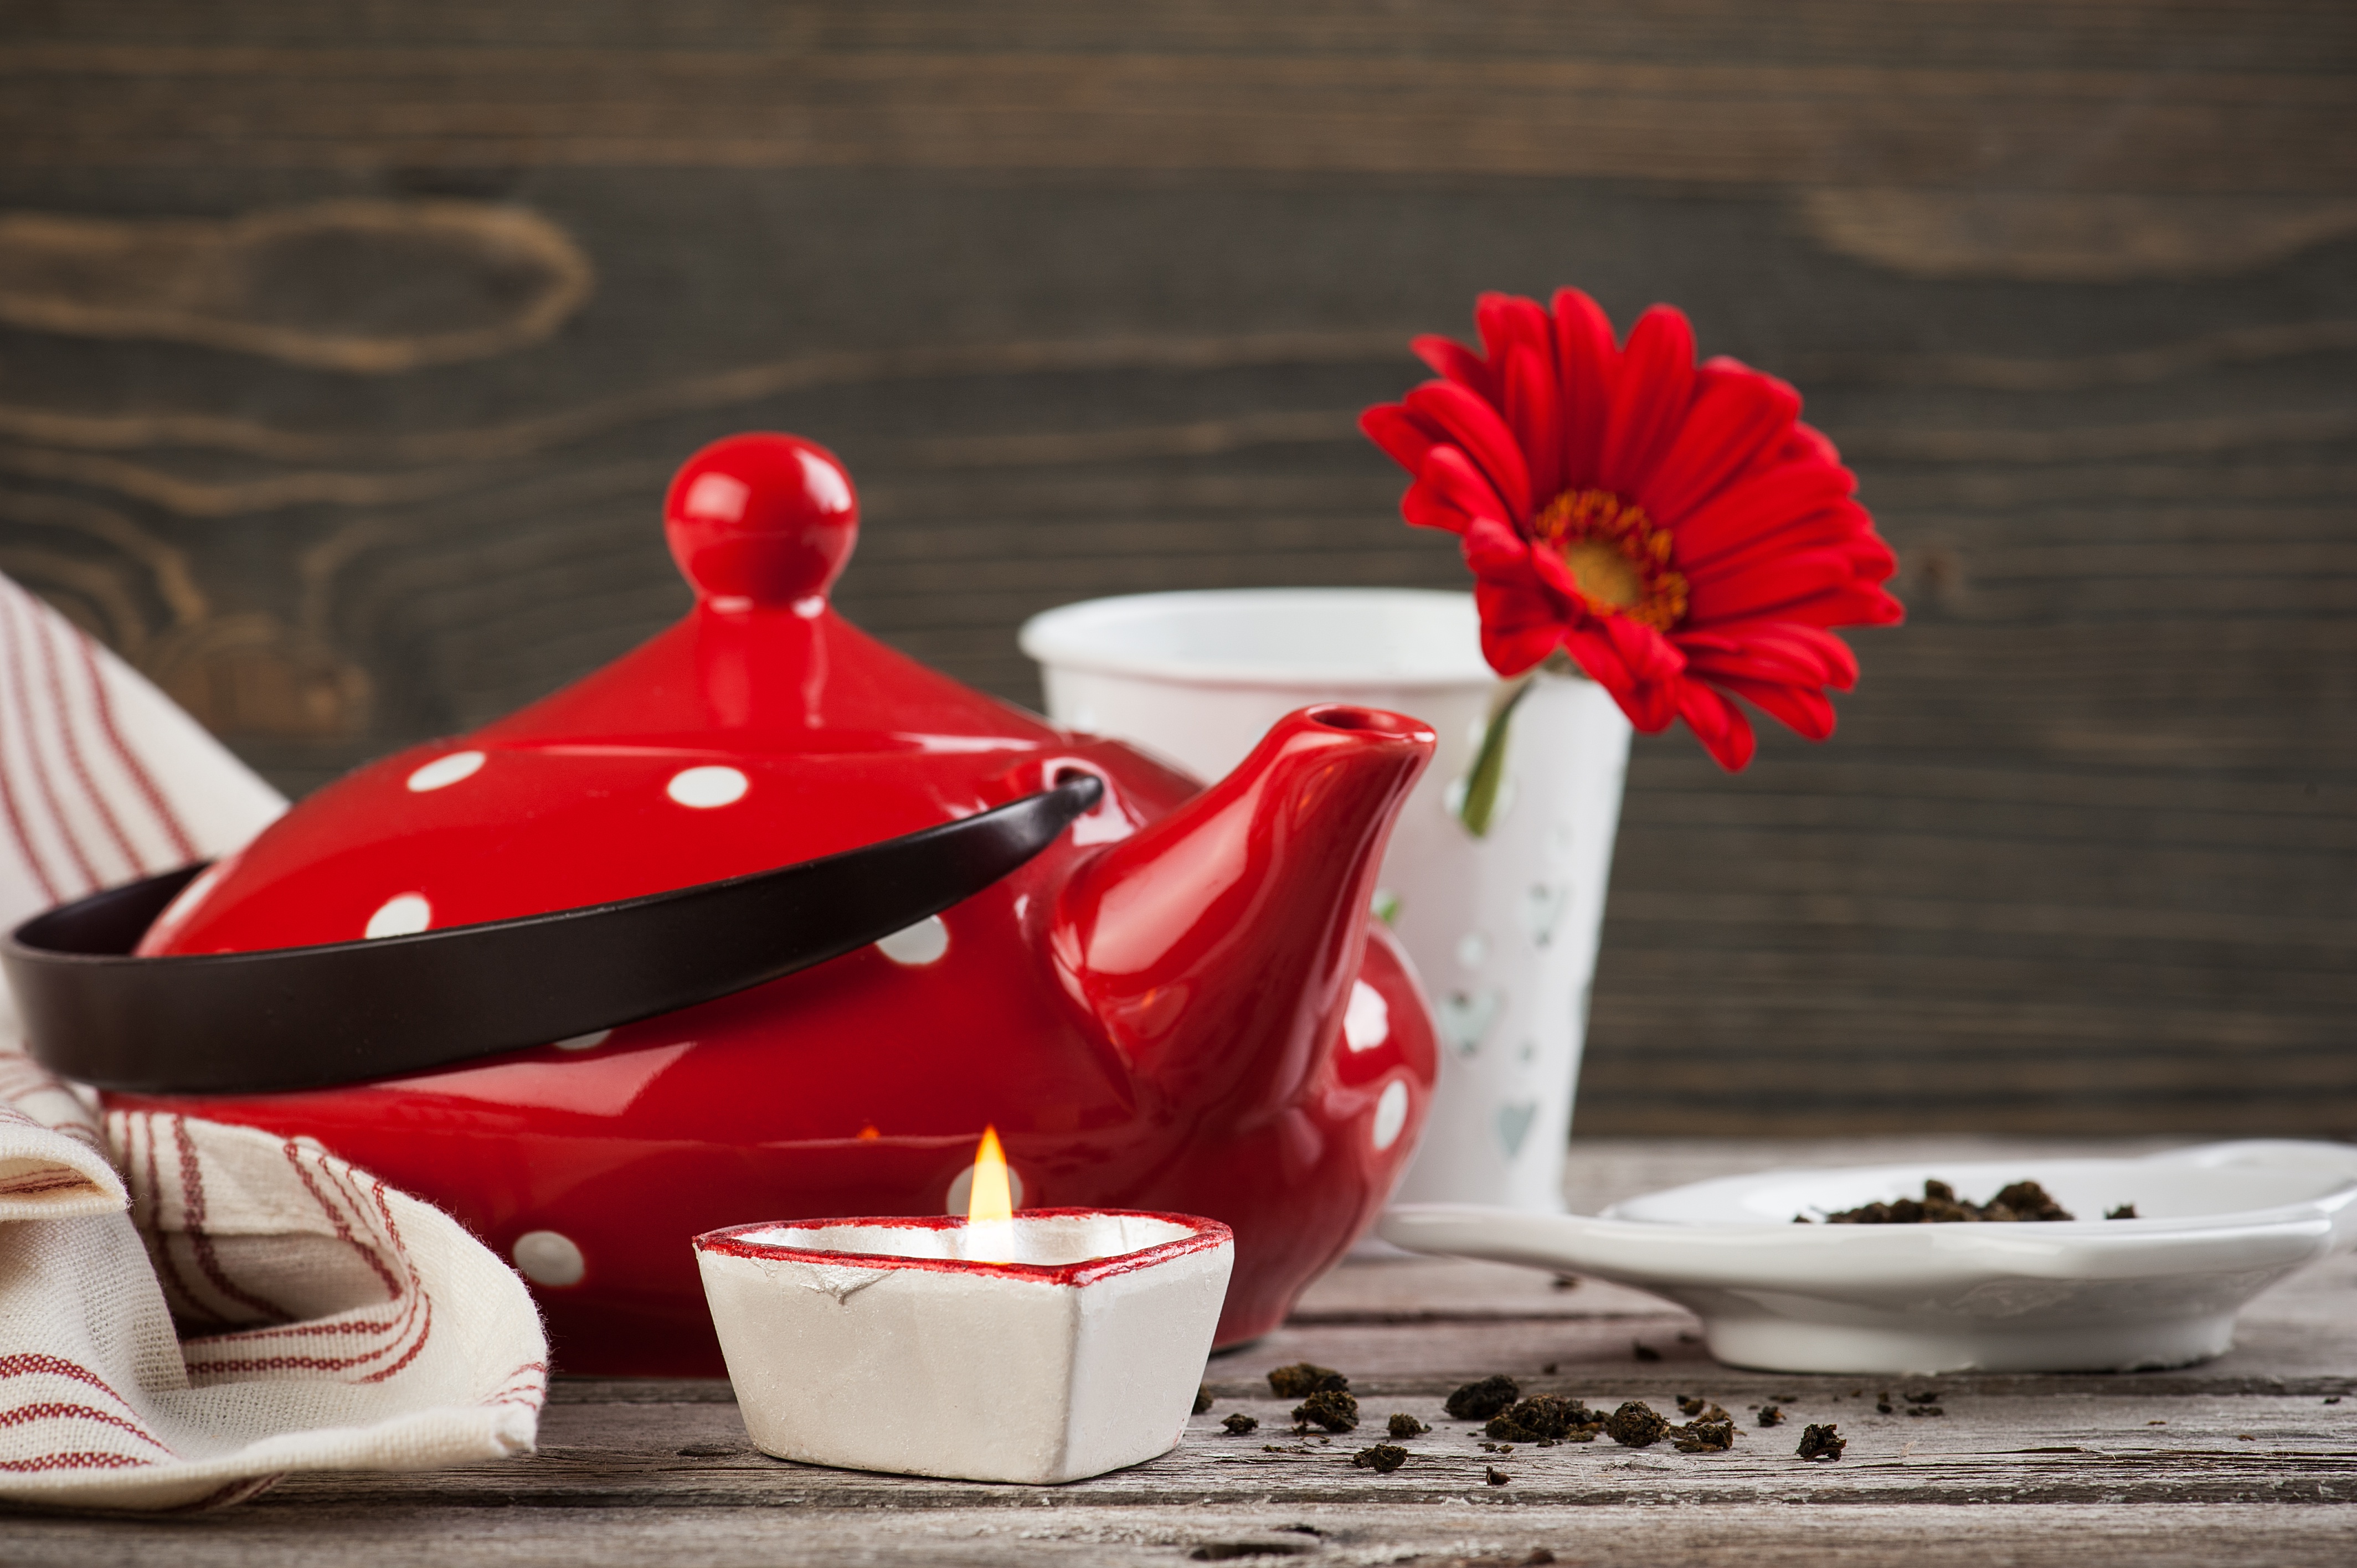 photography, still life, candle, kettle, teapot 1080p